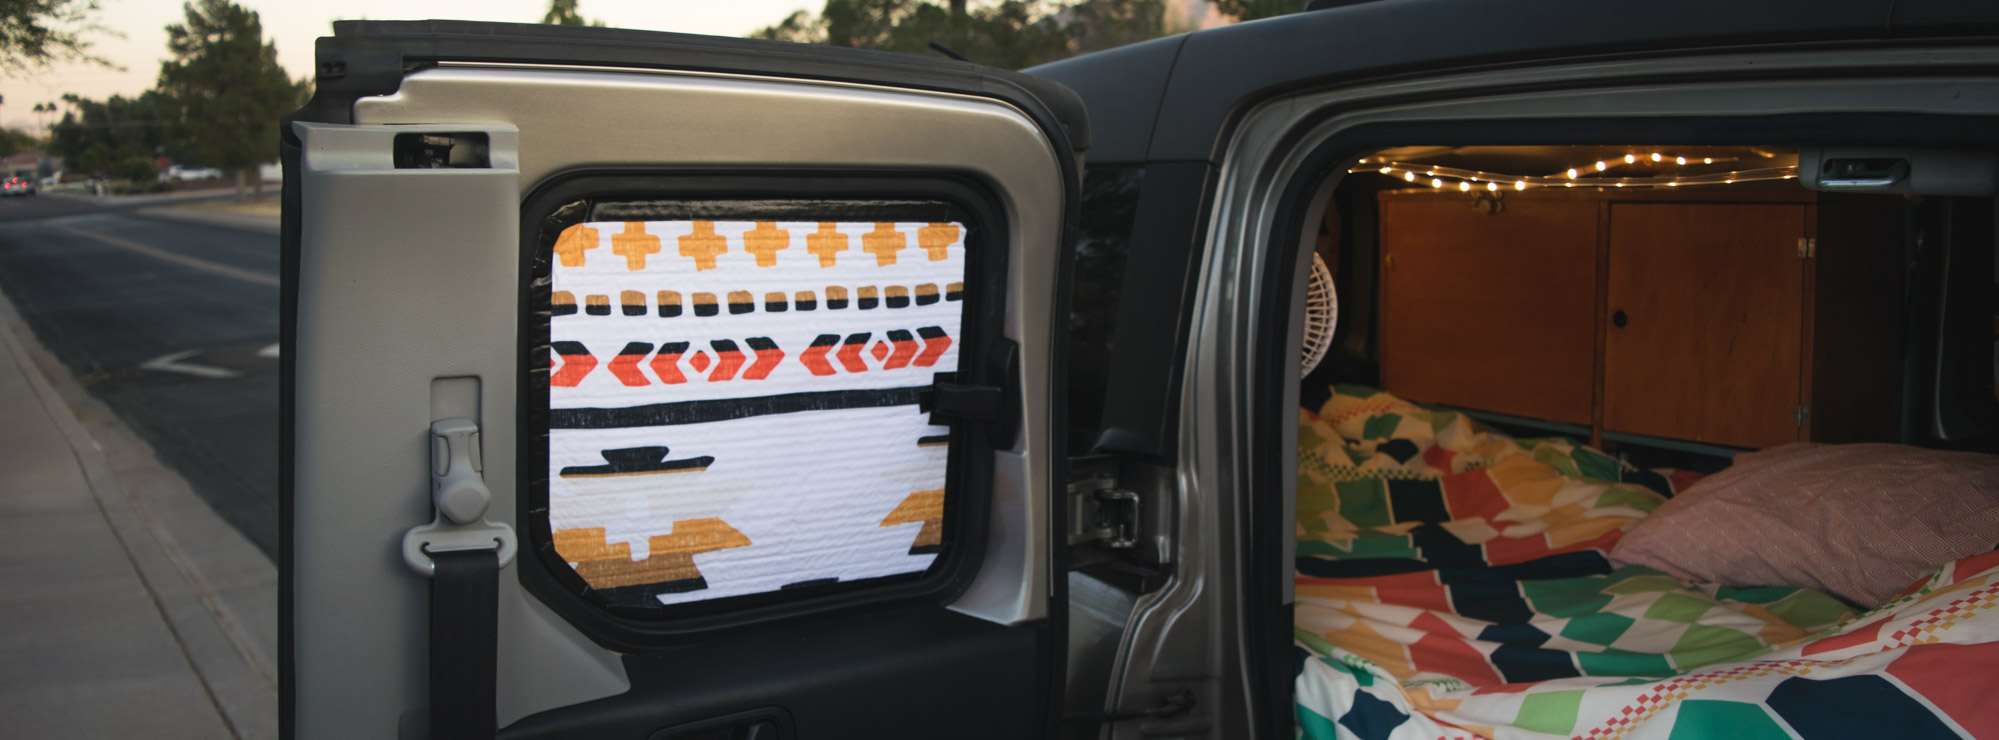 How To Make Beautiful Blackout Window Shades For A Camper Van Or Honda Element Ethan Maurice